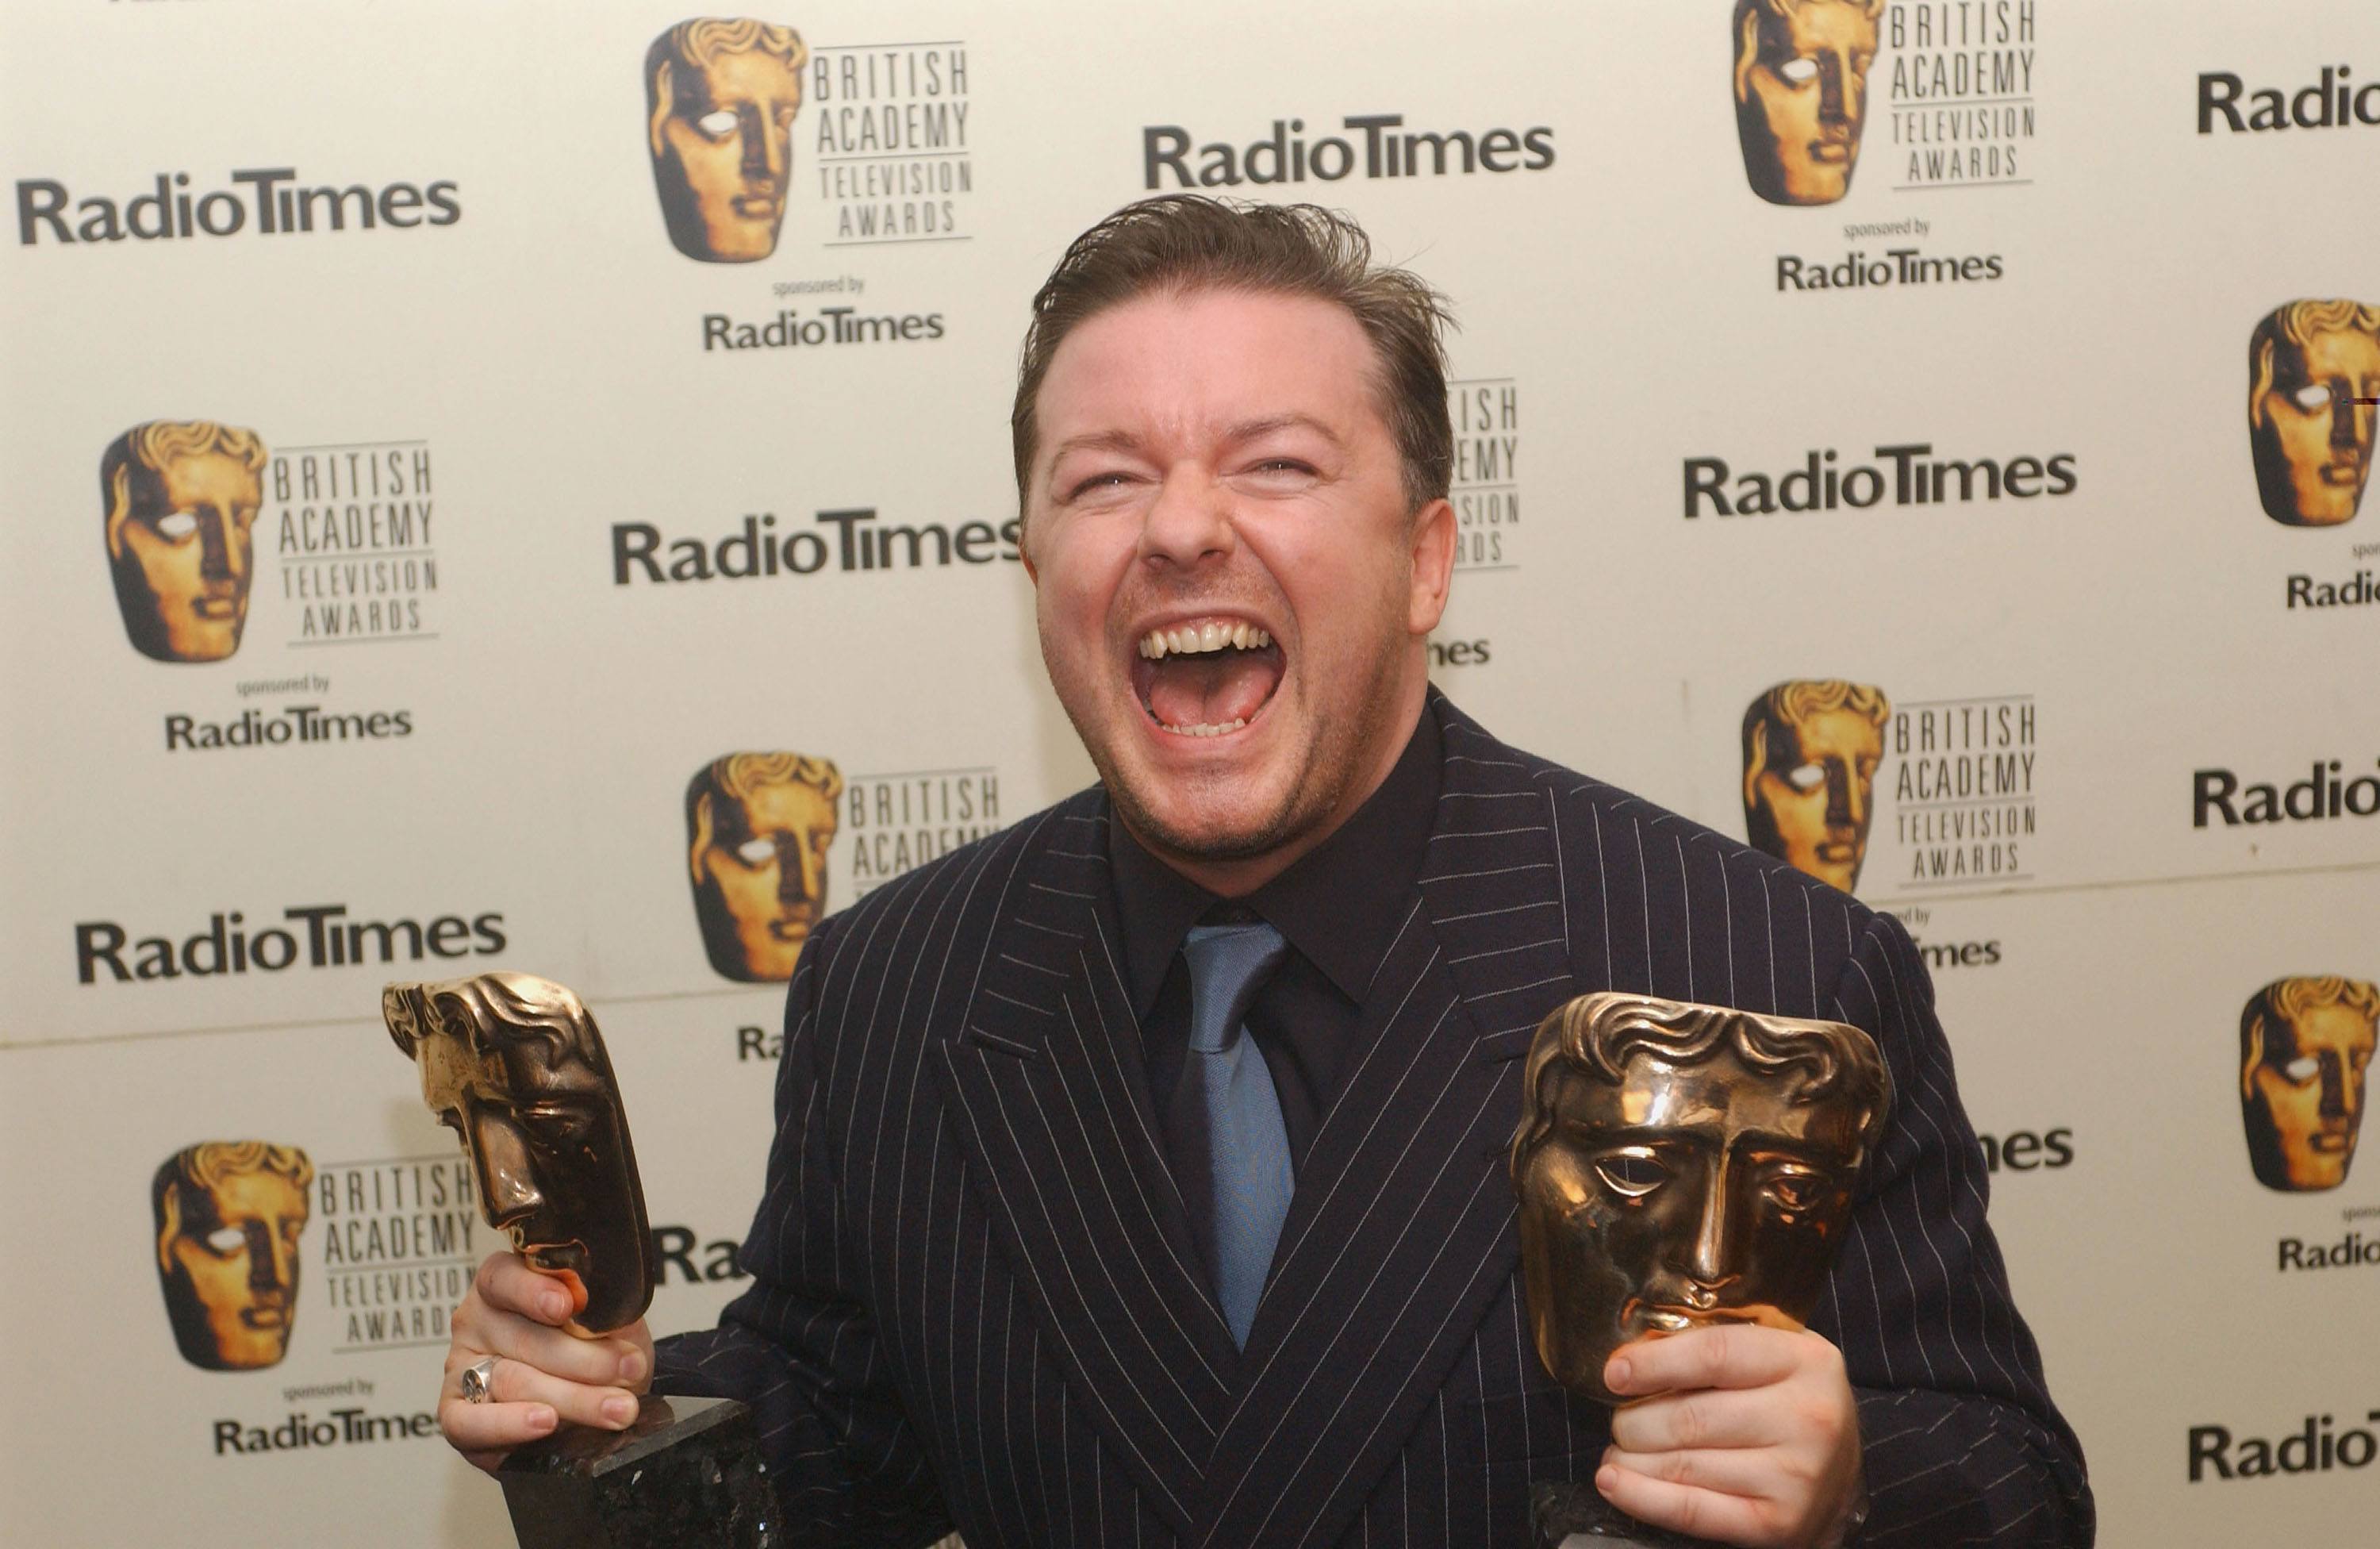 Ricky Gervais at the The British Academy Television Awards in 2004